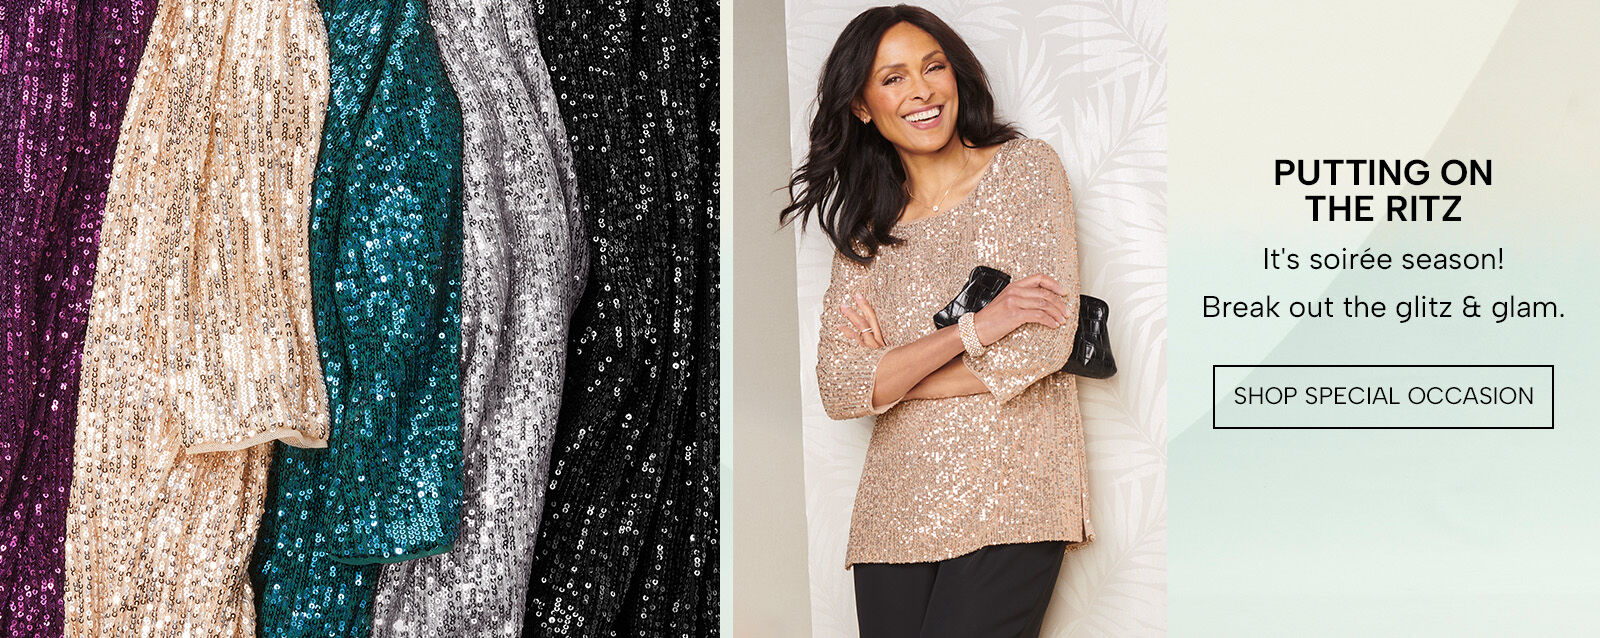 Putting on the Ritz. It's soiree season! Break out the glitz & glam. Shop Special Occasion